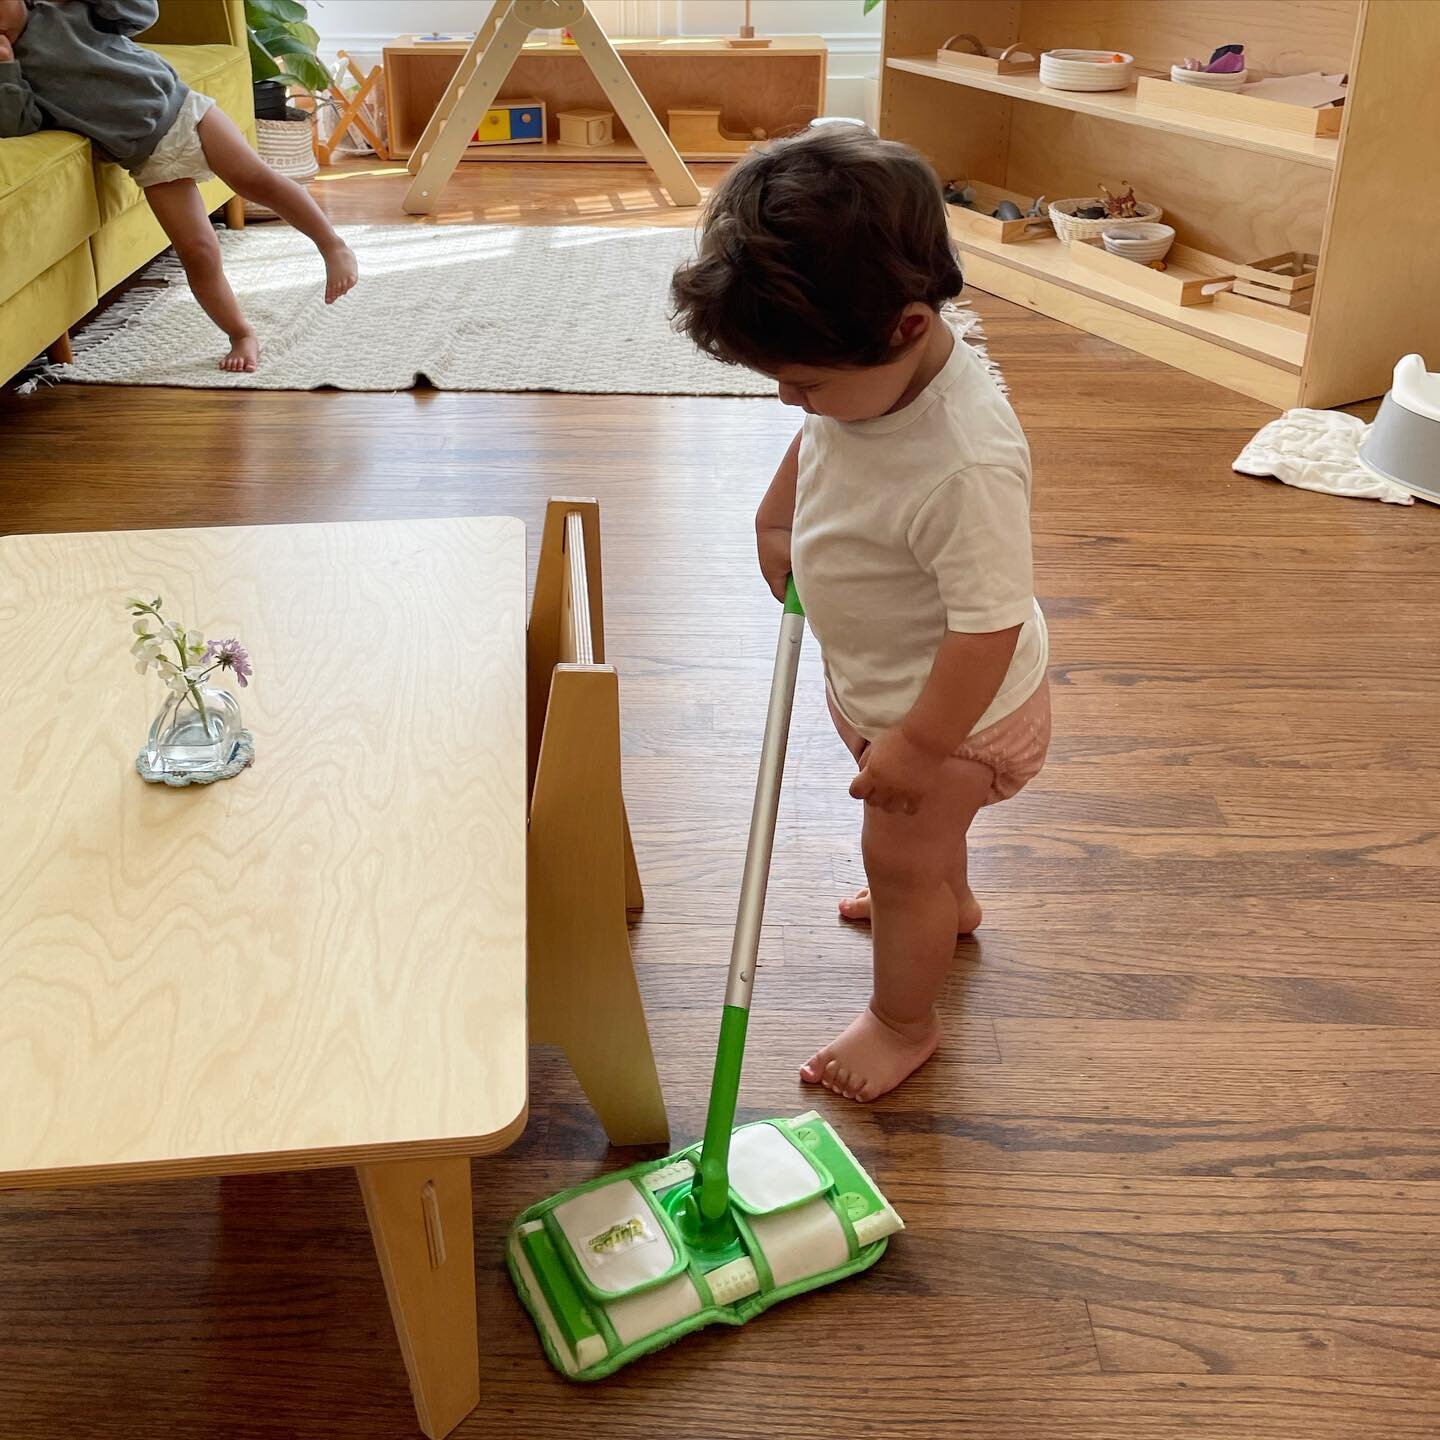 13 months old mopping the floor🧹

Today we captured this 13-month-old child were mopping the floor while the assistant guide was closing the classroom. 

Children are naturally driven to learn how to maintain their environments because they constant